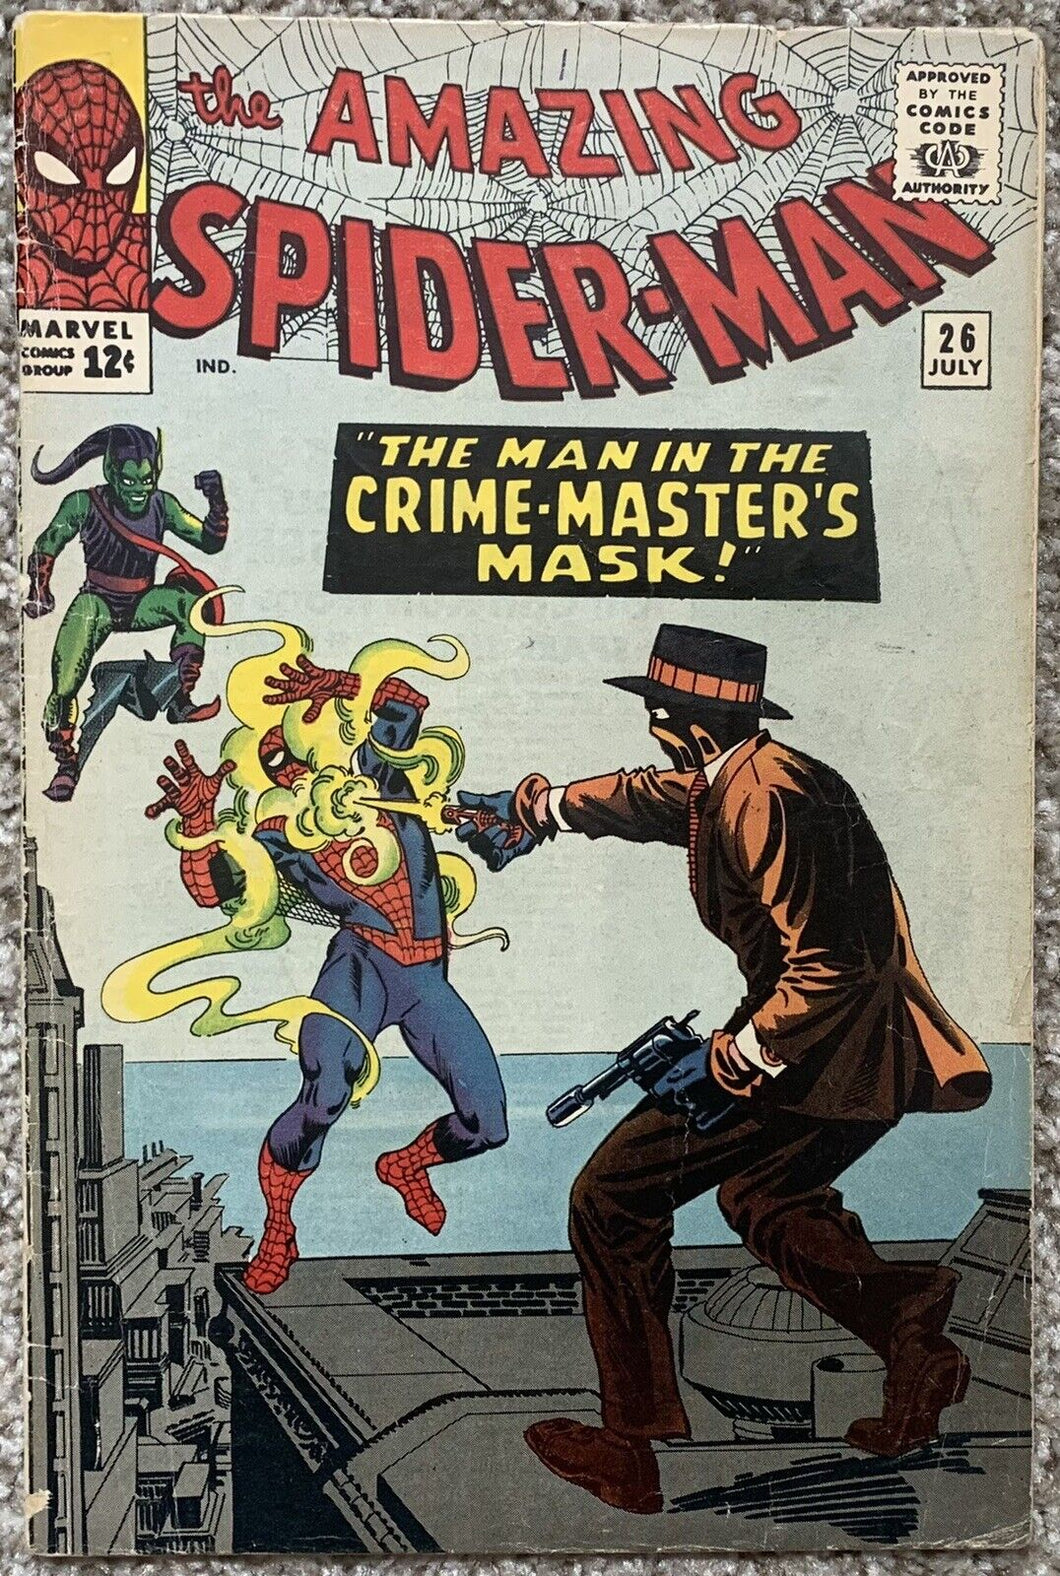 THE AMAZING SPIDER-MAN #26 (MARVEL,1965) 1ST APPEARANCE OF PATCH & CRIME MASTER.